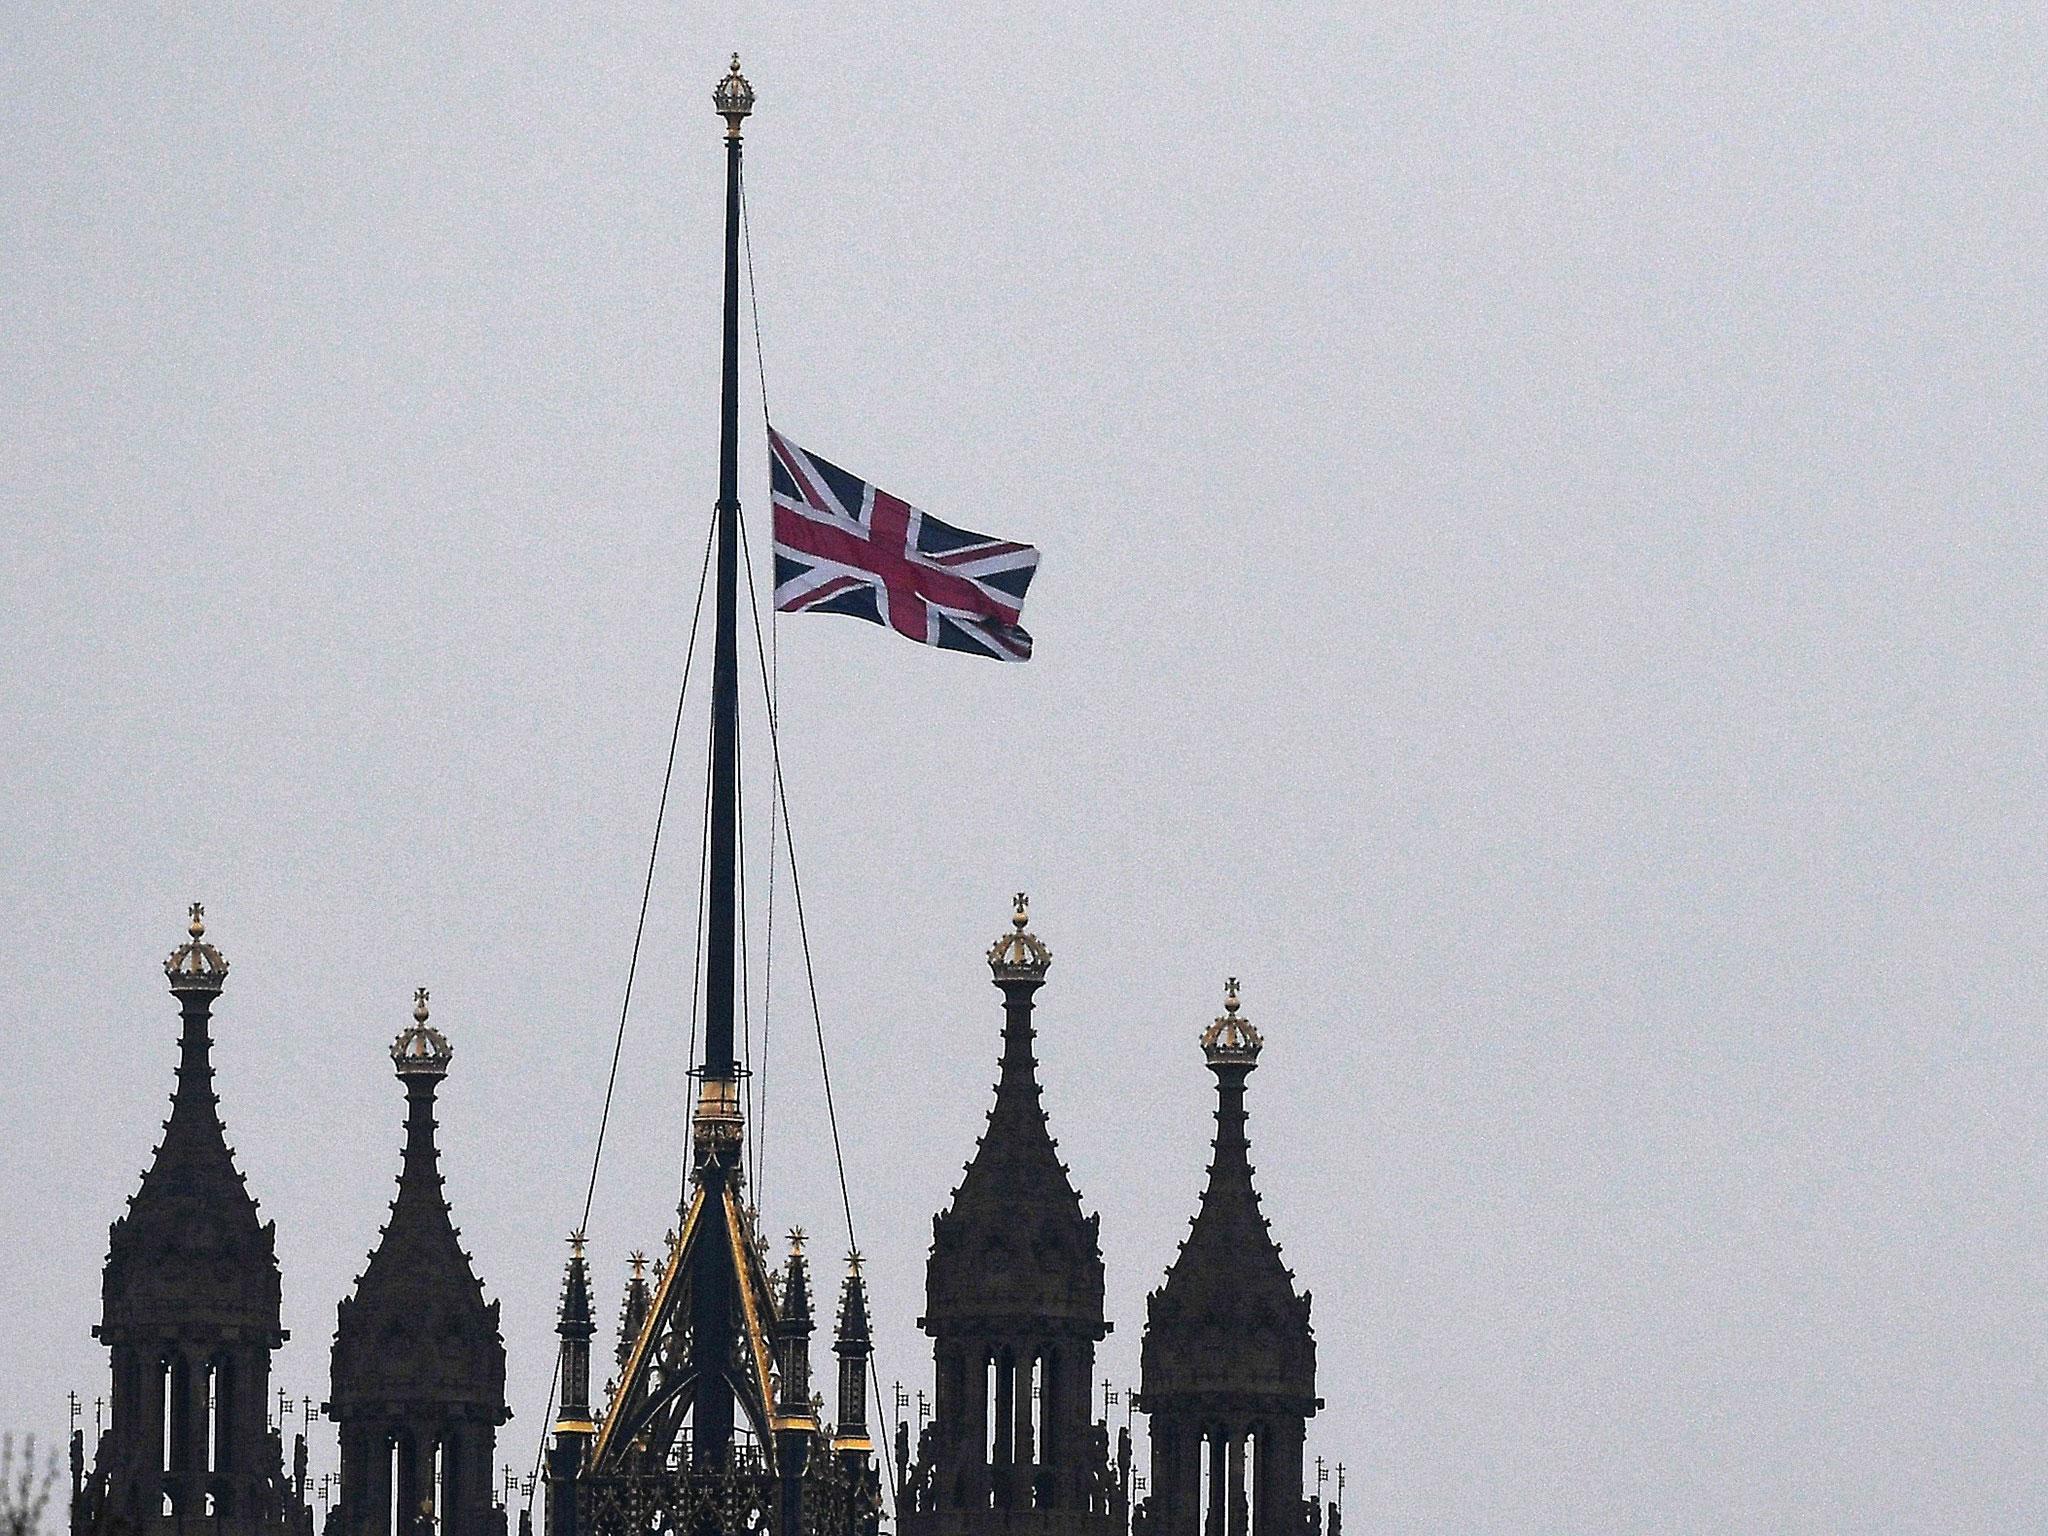 The Union flag flies at half mast at parliament after a suspected terror attack brought bloodshed to central London